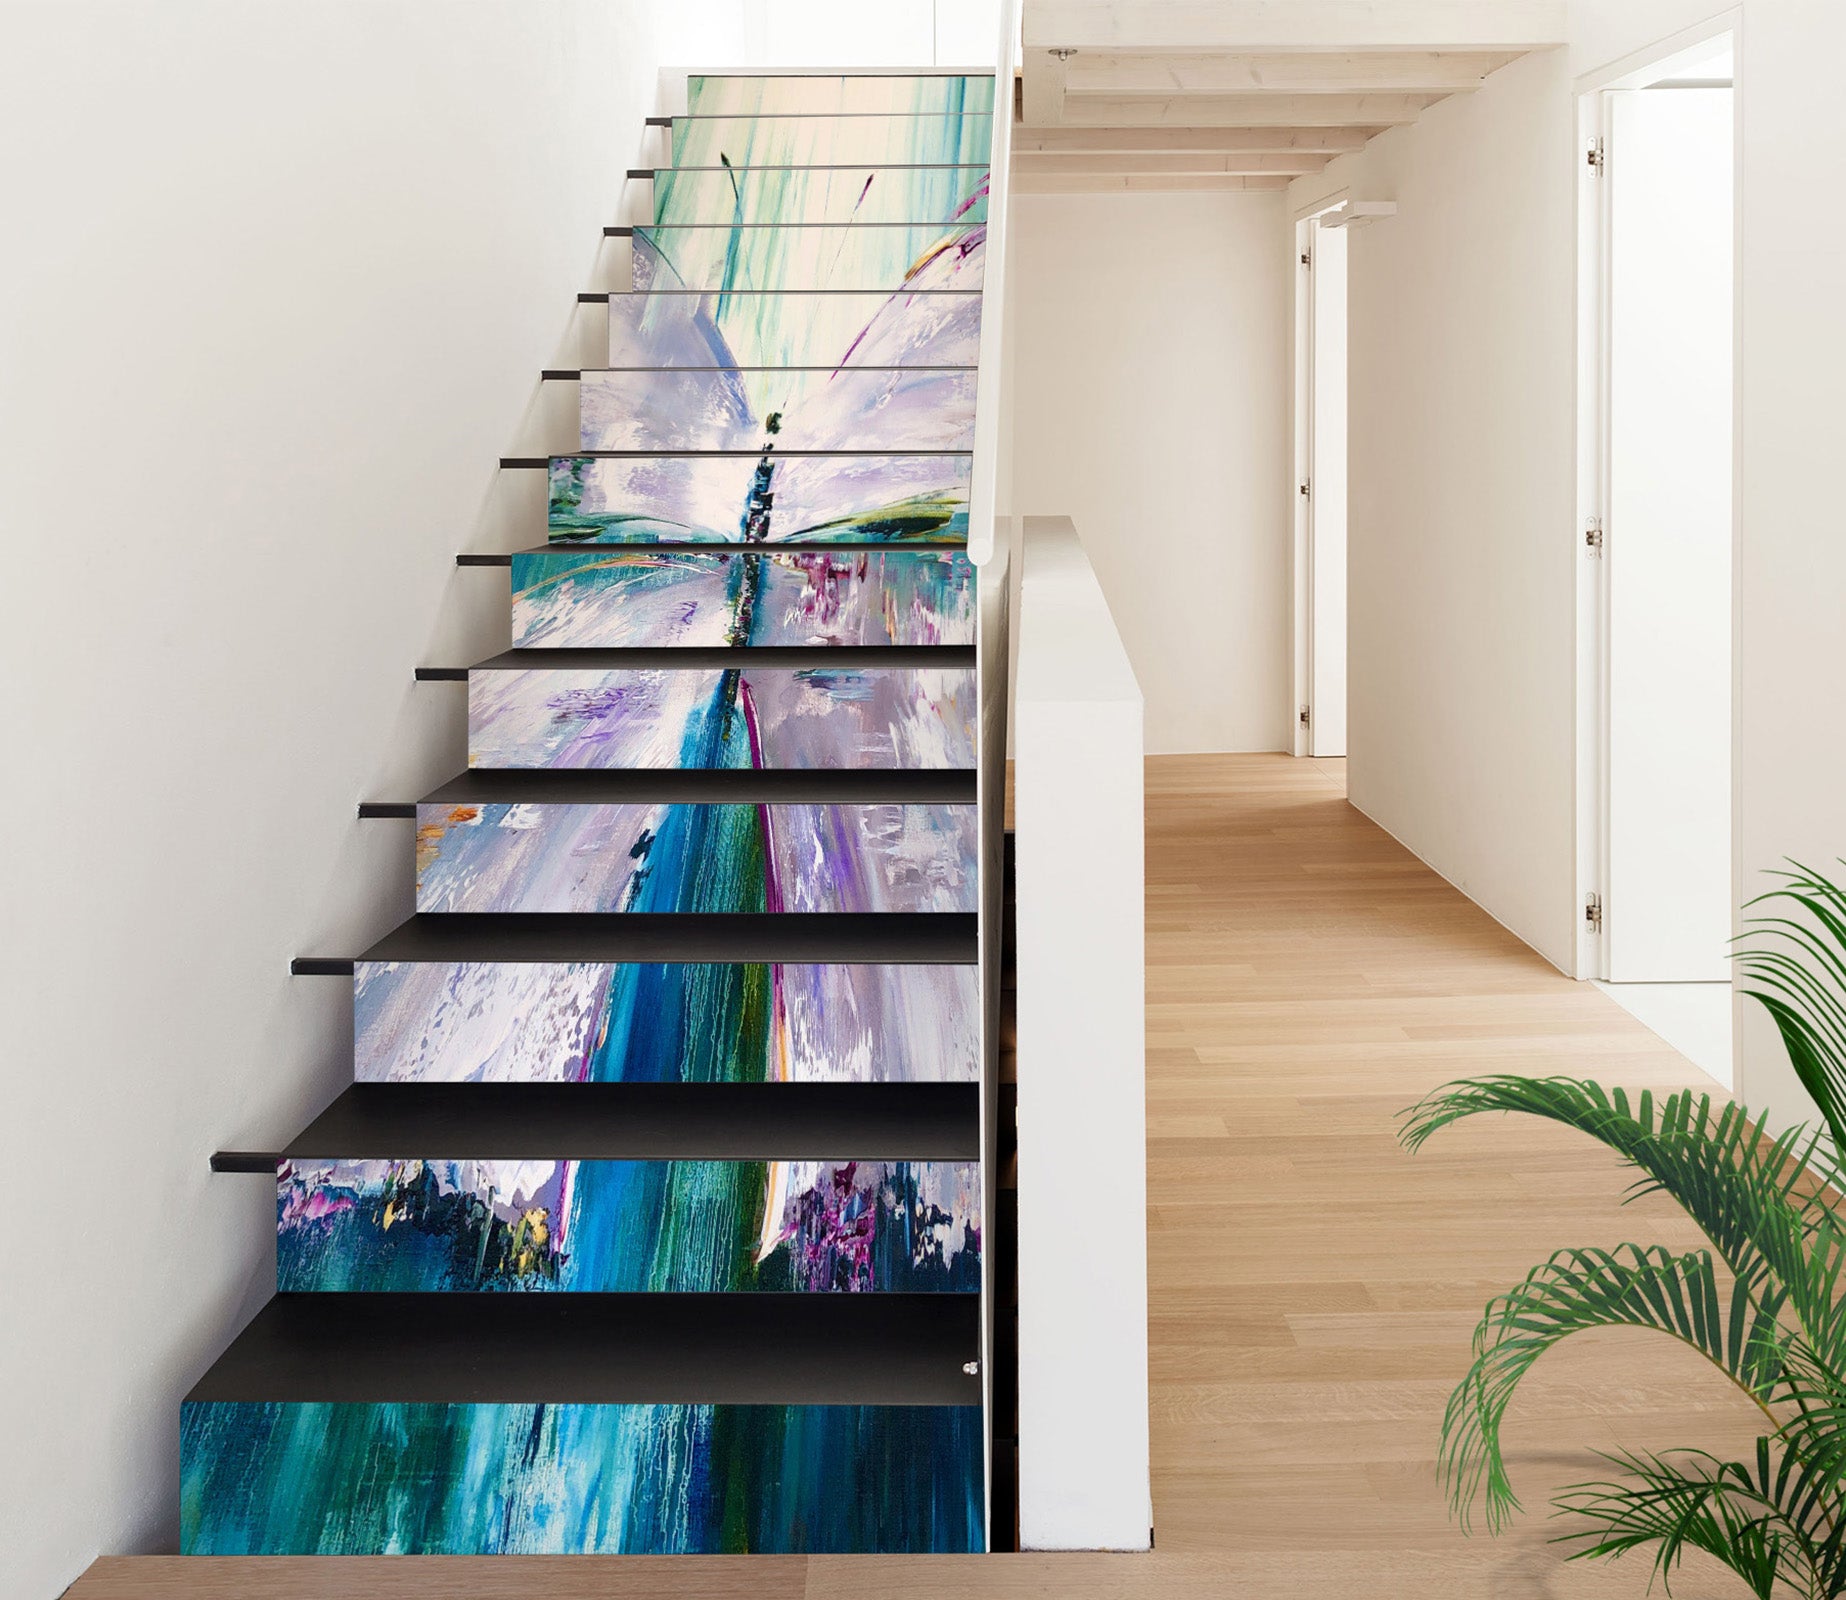 3D Painted Butterfly 2145 Skromova Marina Stair Risers